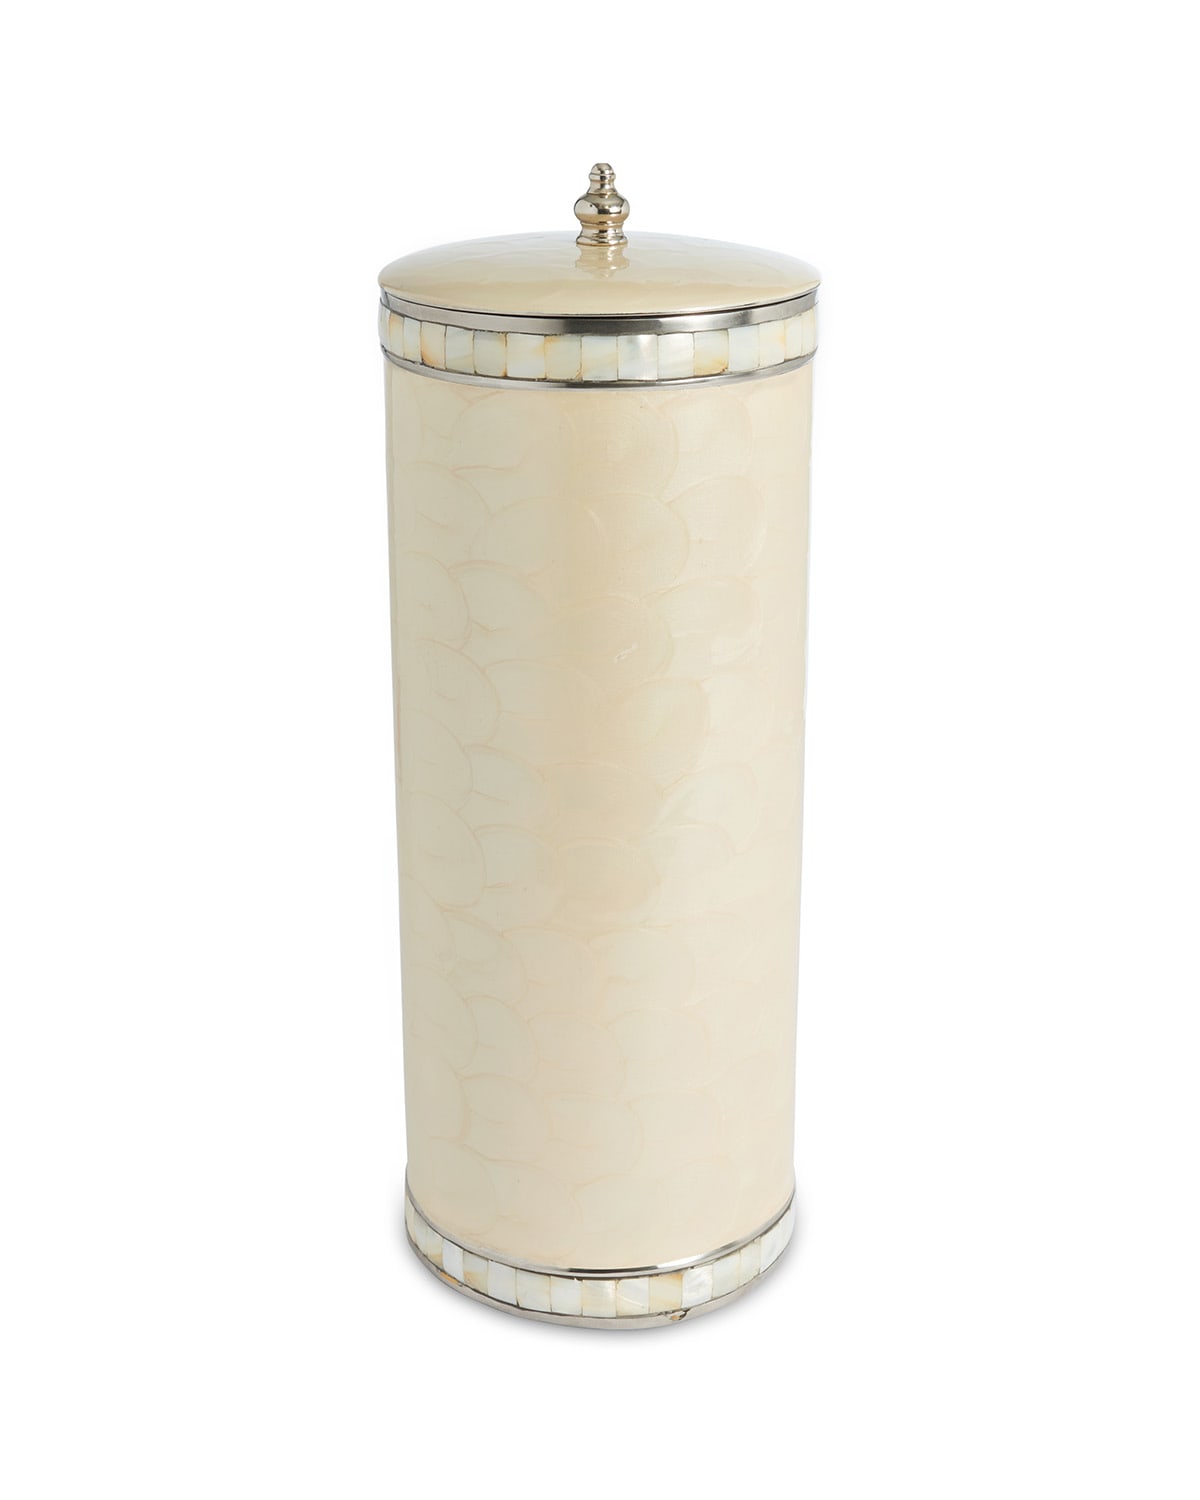 Image Julia Knight Classic Toilet Tissue Covered Holder